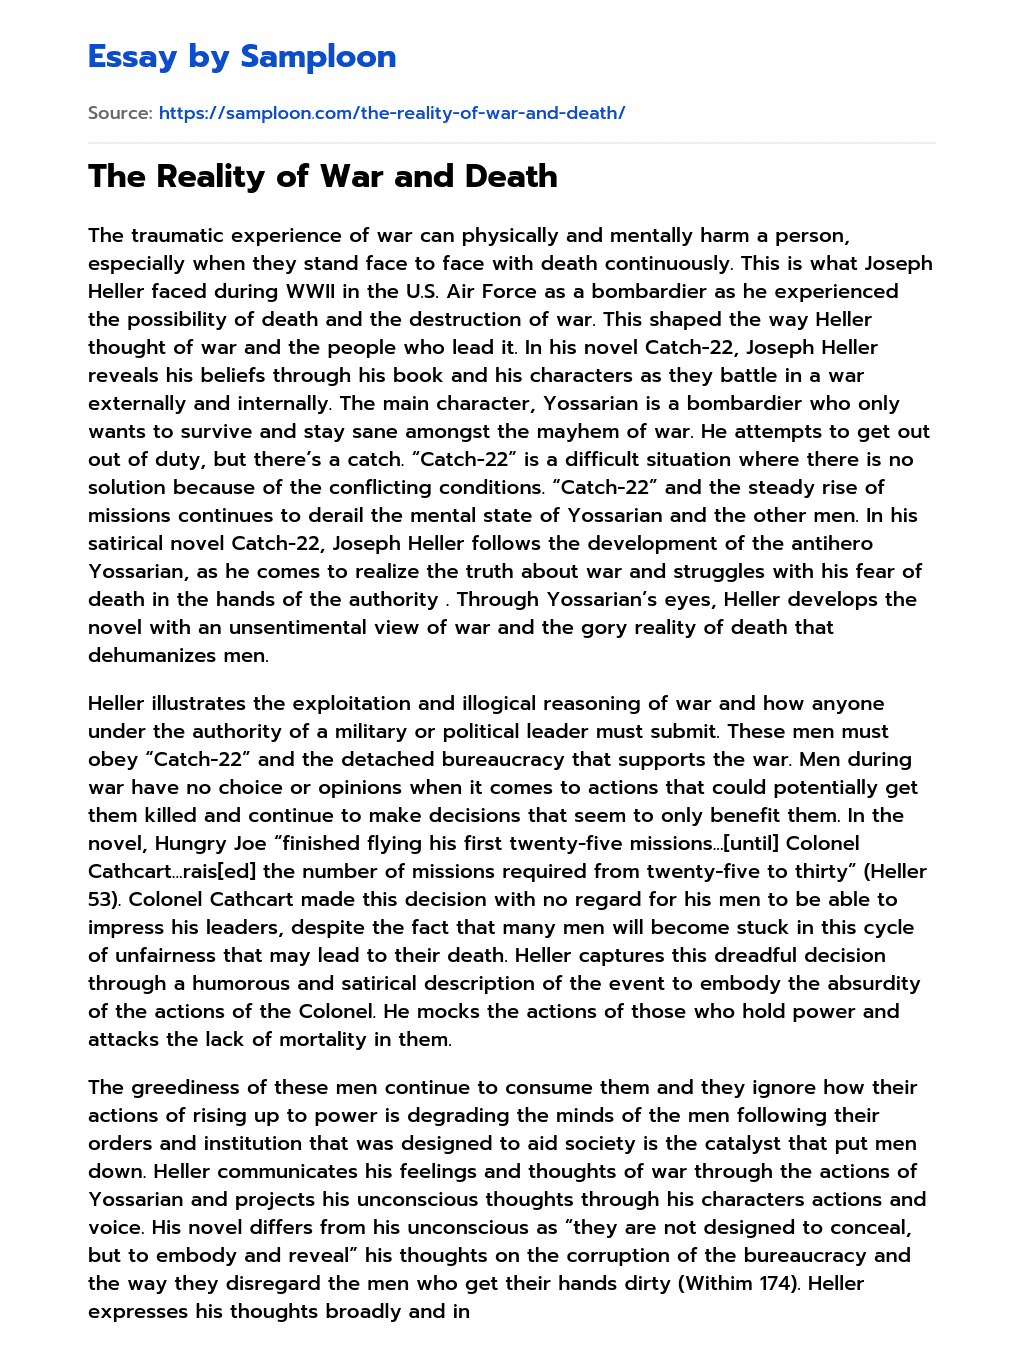 The Reality of War and Death essay